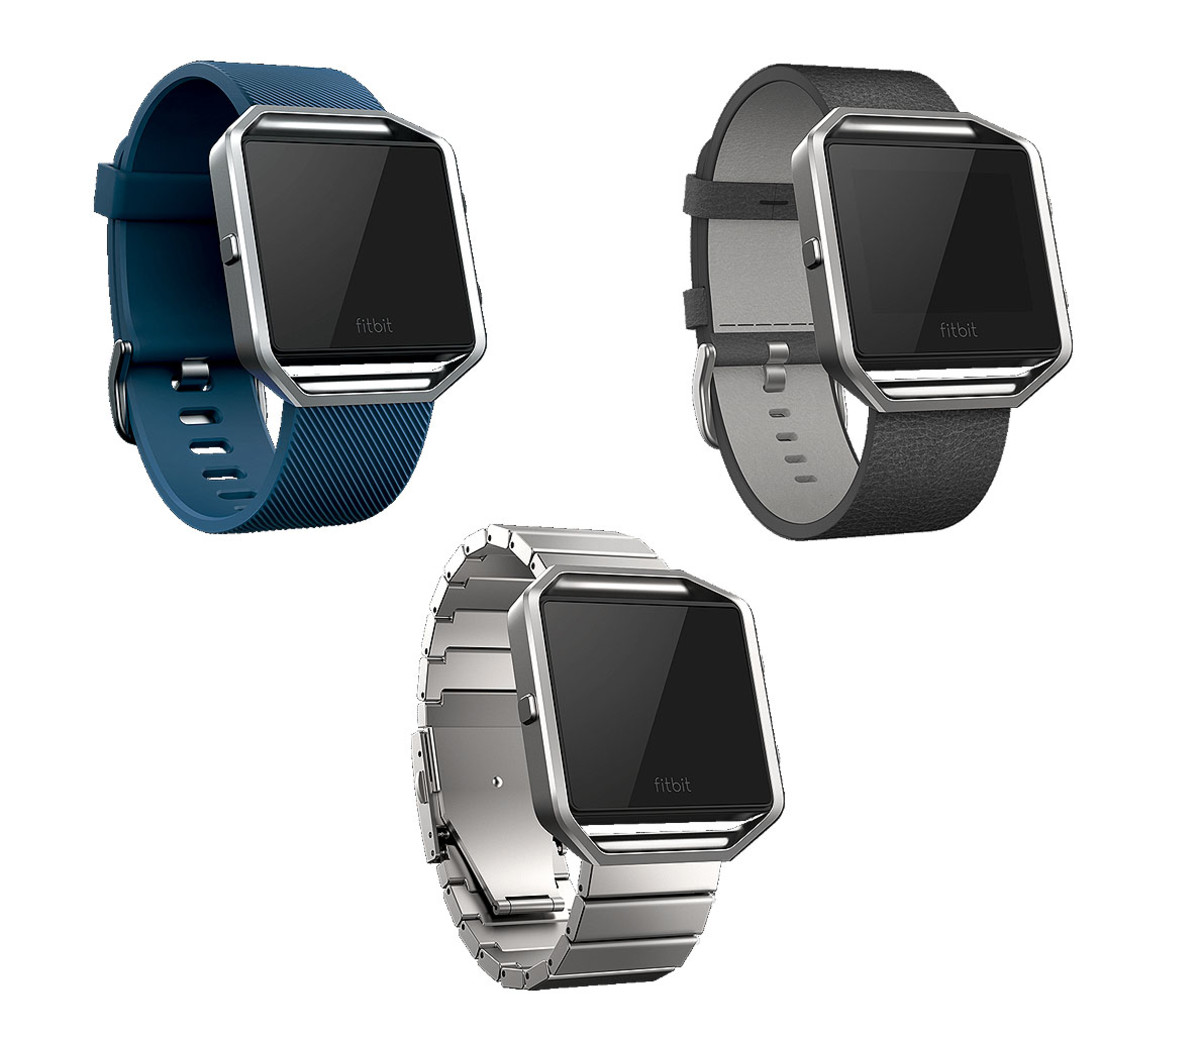 Stylish Smartwatches With Interchangeable Bands - Men's Journal